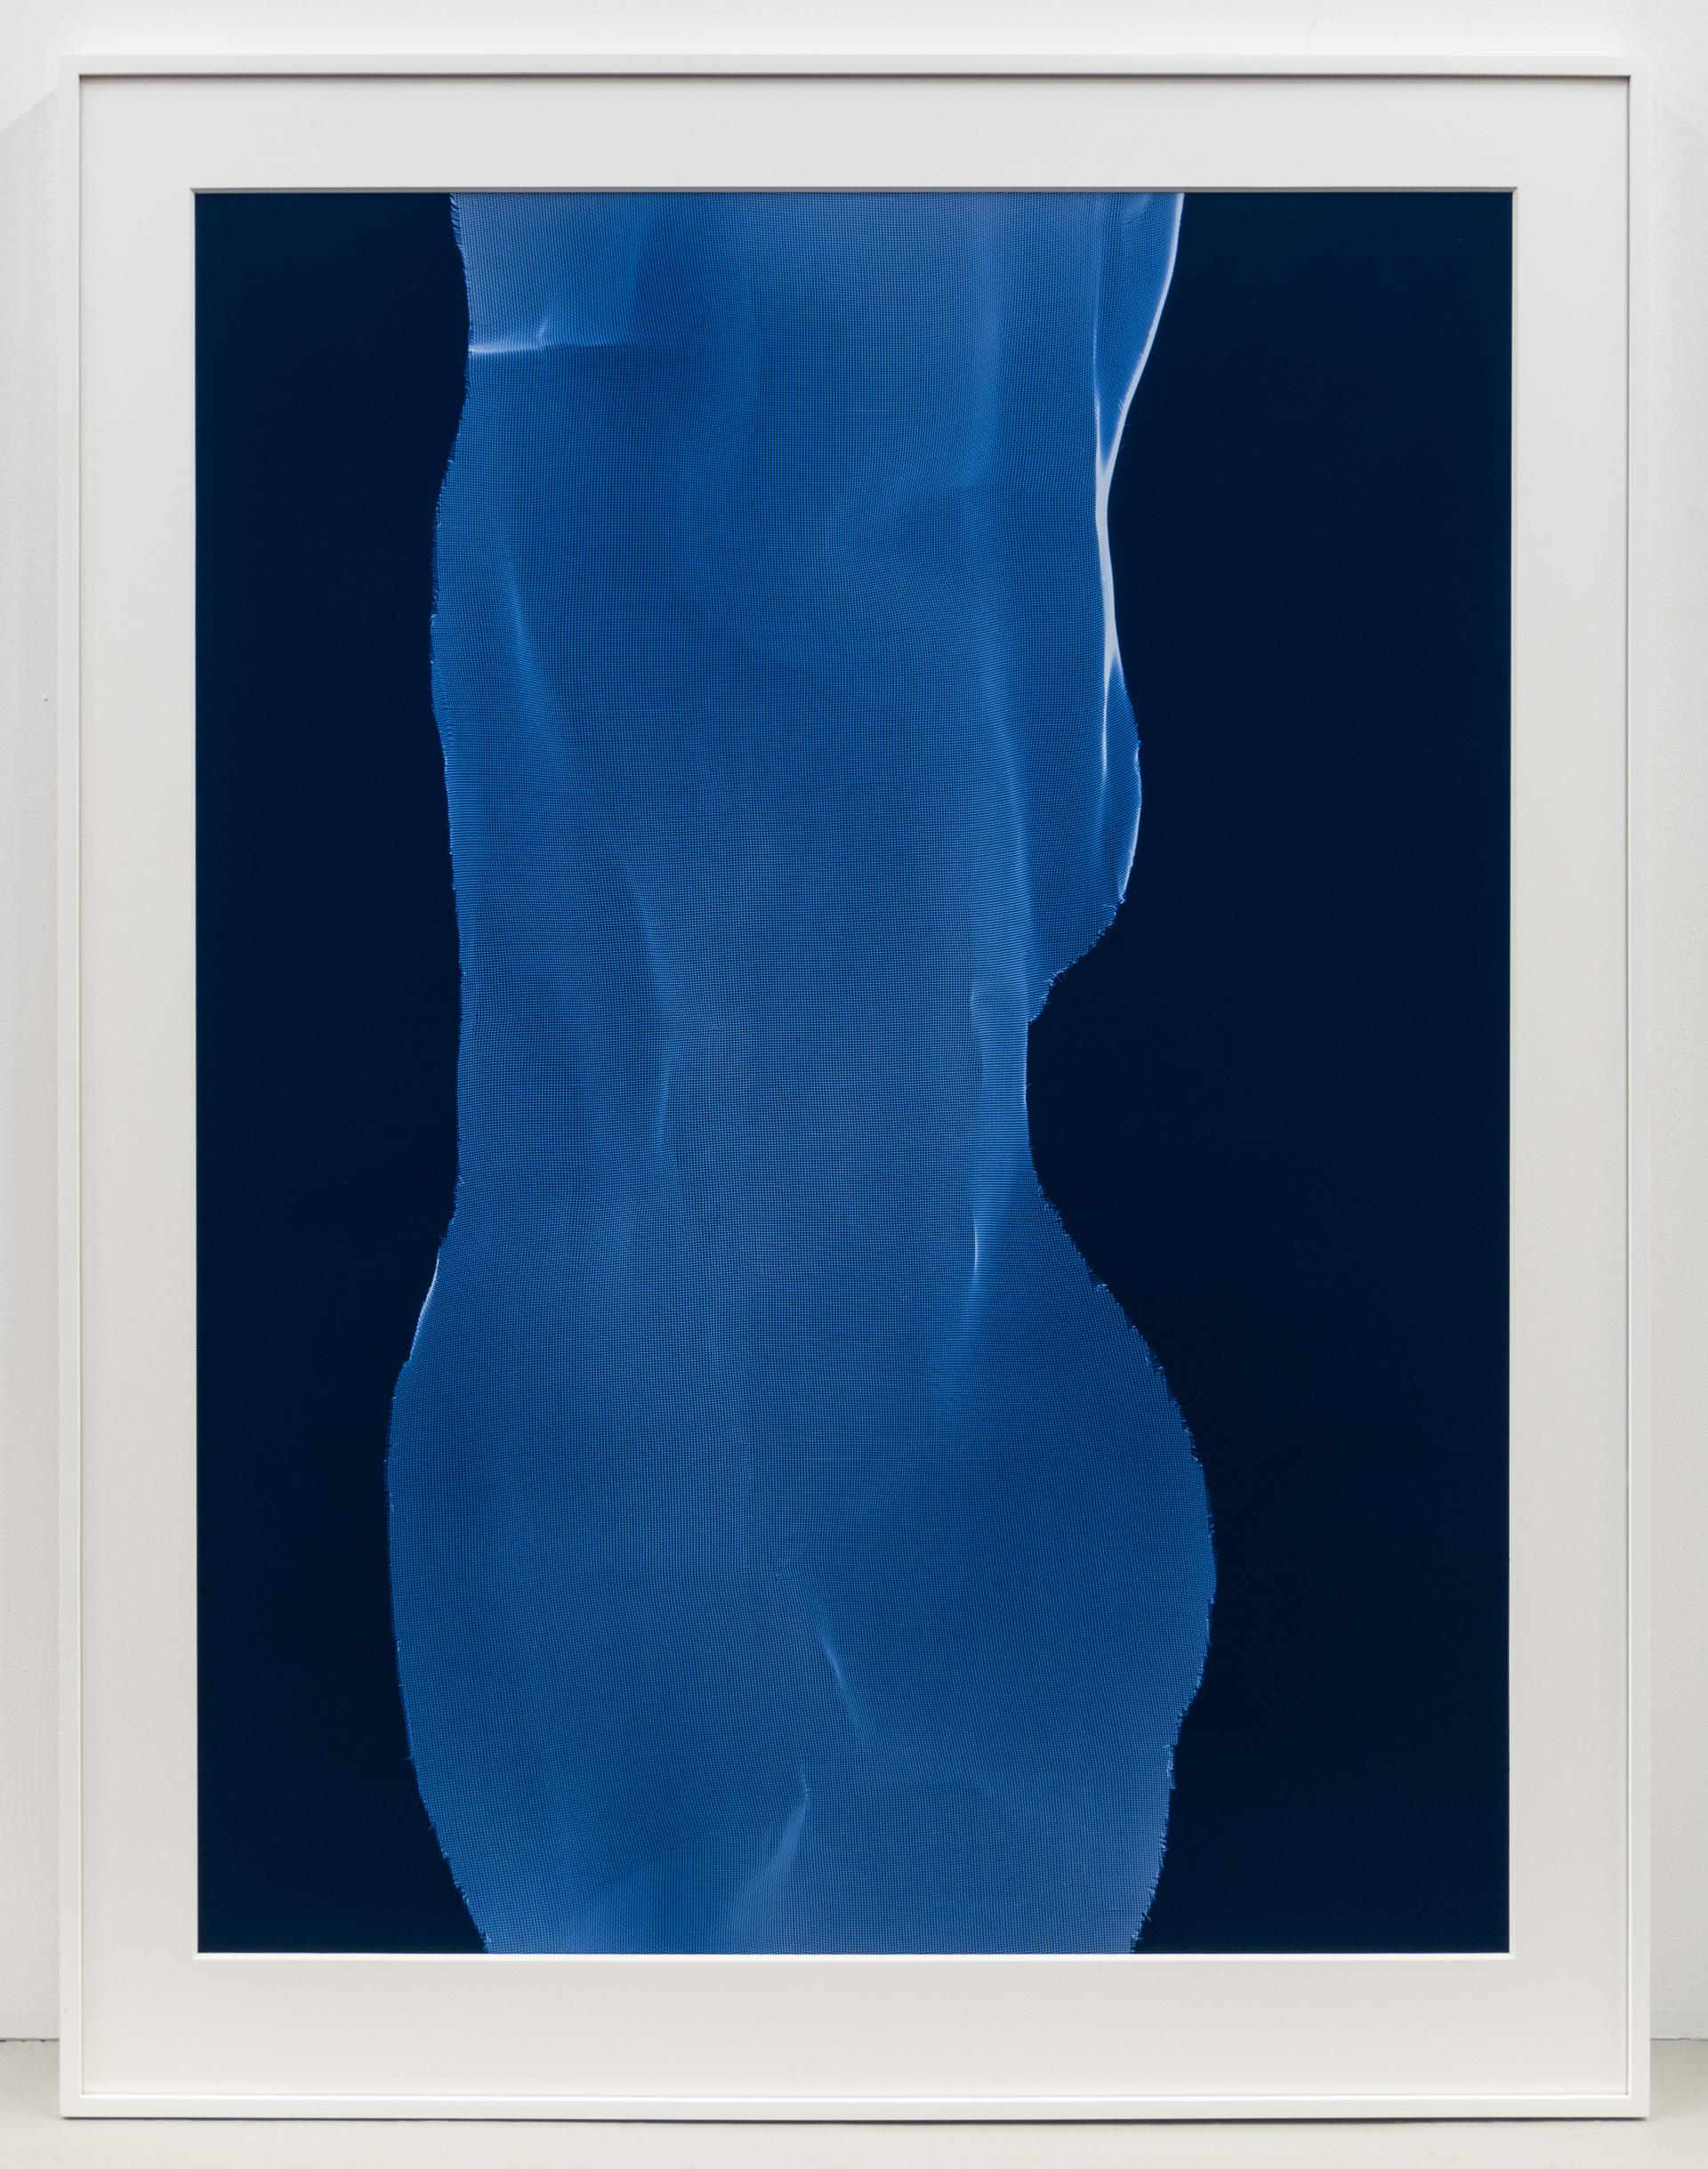 Torso 1-18 - Photograph by James Welling